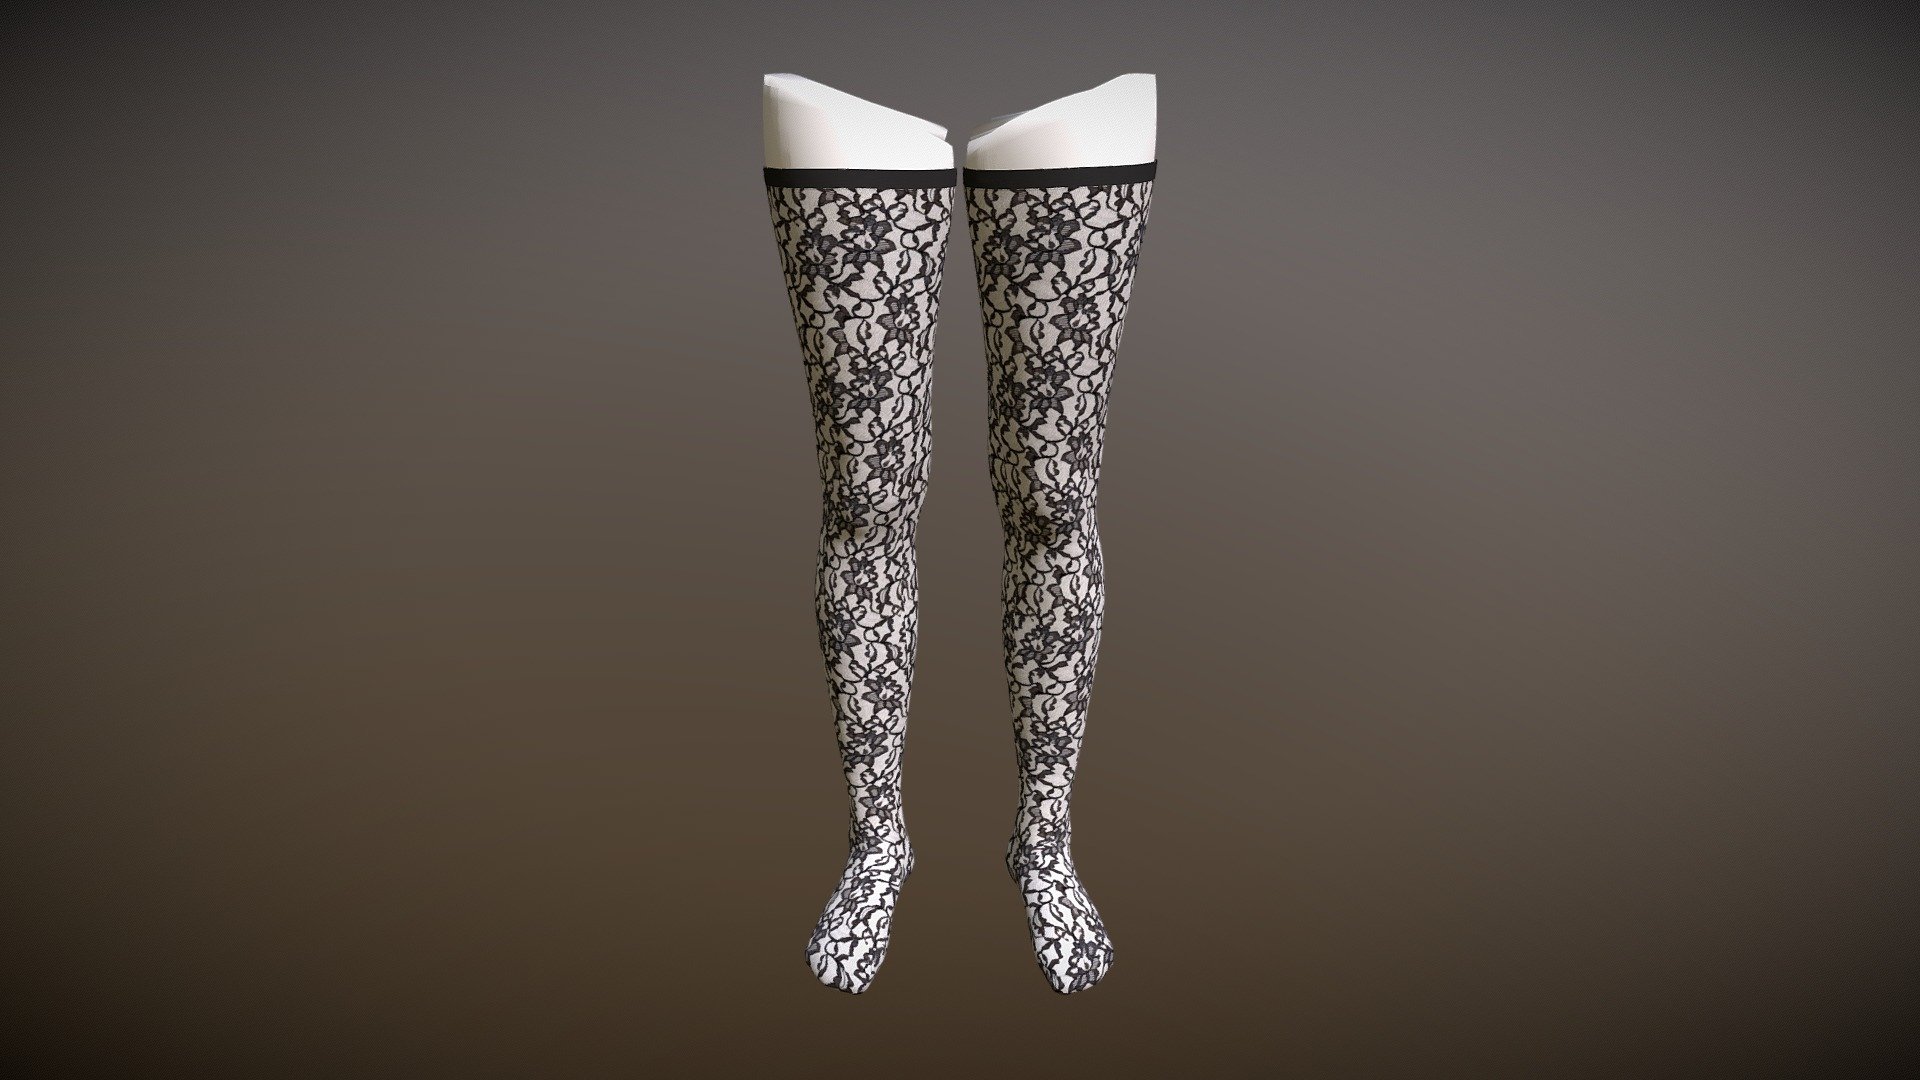 Cloth Title = Women Thigh High Socks Over the Knee High 

SKU = DG100099 

Category = Women 

Product Type = Socks 

Cloth Length = Long 

Body Fit = Skinny Fit 

Occasion = Activewear 


Our Services:

3D Apparel Design.

OBJ,FBX,GLTF Making with High/Low Poly.

Fabric Digitalization.

Mockup making.

3D Teck Pack.

Pattern Making.

2D Illustration.

Cloth Animation and 360 Spin Video.


Contact us:- 

Email: info@digitalfashionwear.com 

Website: https://digitalfashionwear.com 

WhatsApp No: +8801759350445 


We designed all the types of cloth specially focused on product visualization, e-commerce, fitting, and production. 

We will design: 

T-shirts 

Polo shirts 

Hoodies 

Sweatshirt 

Jackets 

Shirts 

TankTops 

Trousers 

Bras 

Underwear 

Blazer 

Aprons 

Leggings 

and All Fashion items. 





Our goal is to make sure what we provide you, meets your demand 3d model